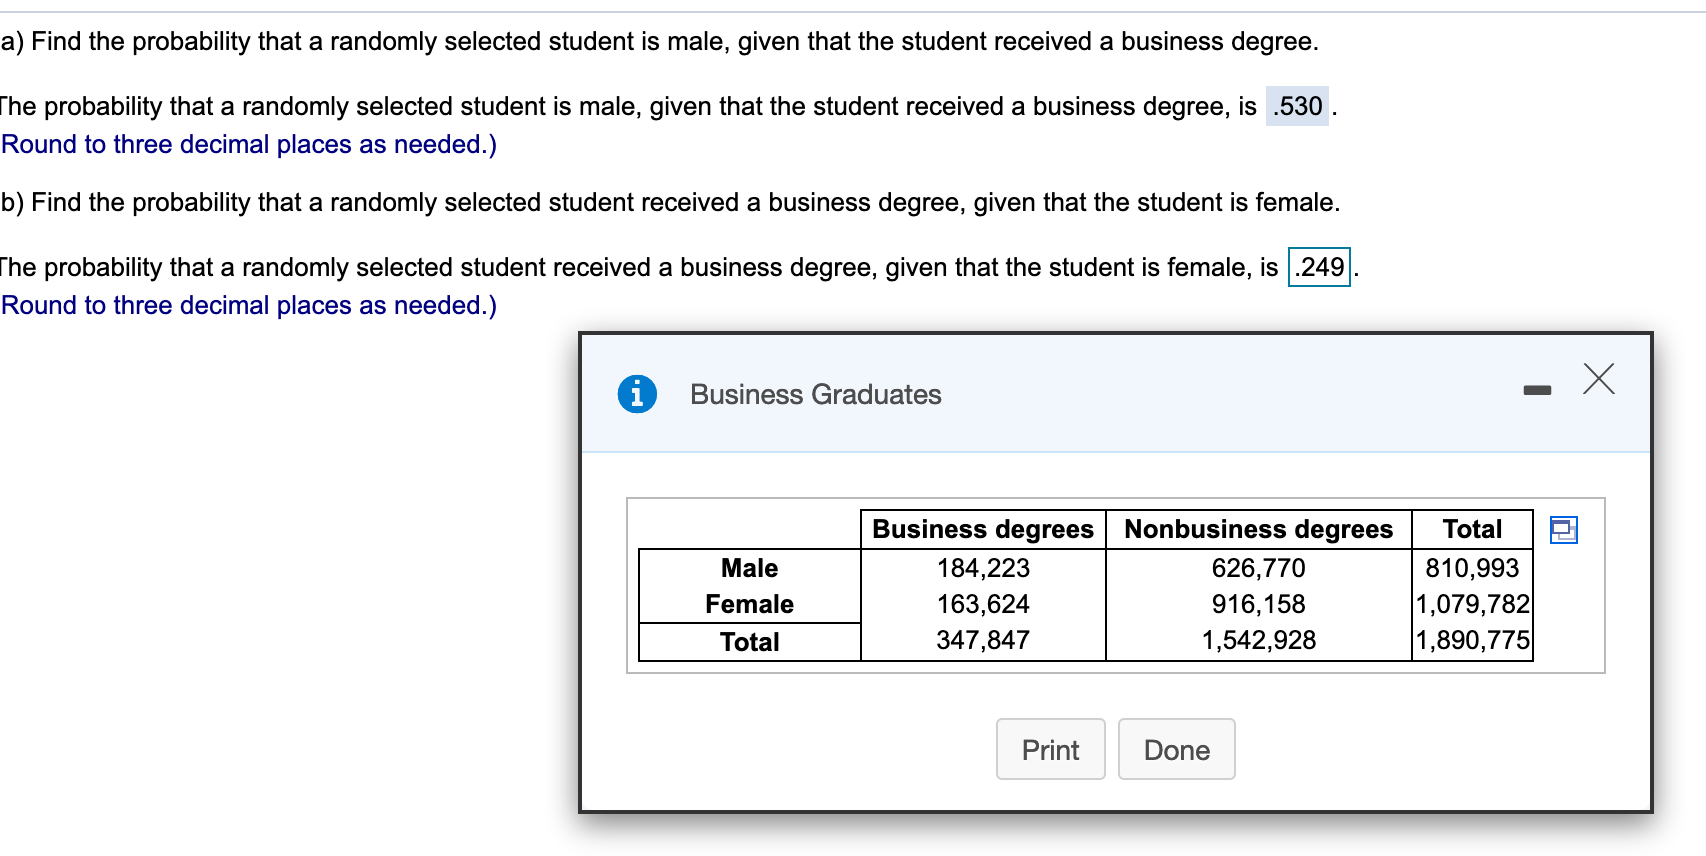 a) Find the probability that a randomly selected student is male, given that the student received a business degree.
The probability that a randomly selected student is male, given that the student received a business degree, is .530.
Round to three decimal places as needed.)
b) Find the probability that a randomly selected student received a business degree, given that the student is female.
The probability that a randomly selected student received a business degree, given that the student is female, is 249
Round to three decimal places as needed.)
X
i
Business Graduates
Business degrees
Nonbusiness degrees
Total
626,770
Male
184,223
810,993
1,079,782
1,890,775
Female
916,158
163,624
347,847
1,542,928
Total
Print
Done
